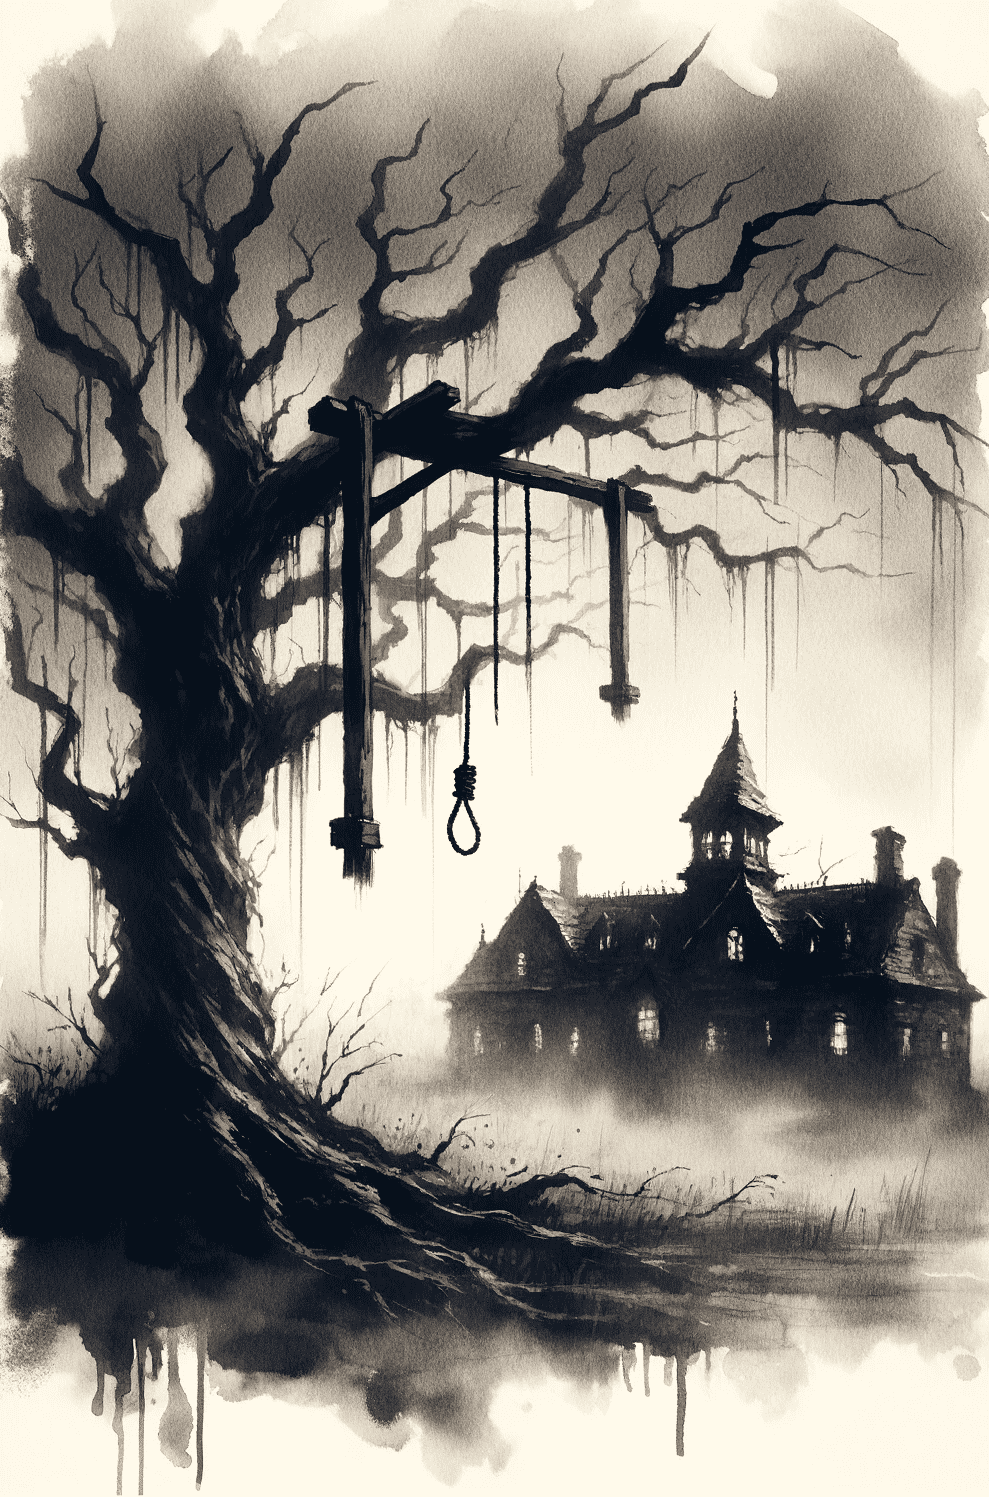 Preview image for blog post about movies like the conjuring - features a gallows tree with a creepy haunted house in the background